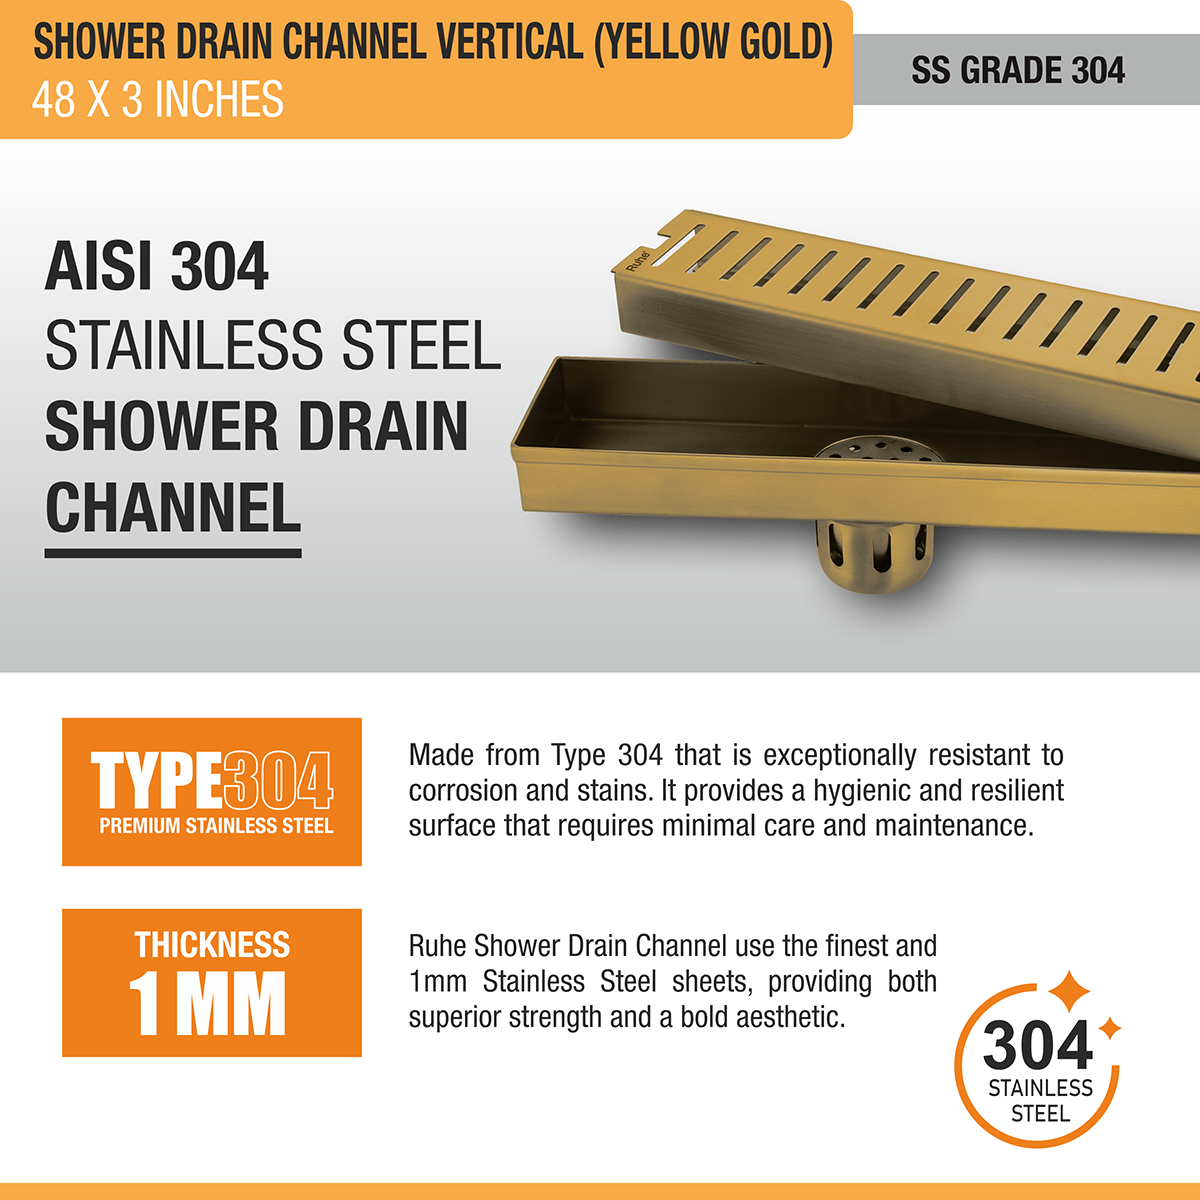 Vertical Shower Drain Channel (48 x 3 Inches) YELLOW GOLD stainless steel